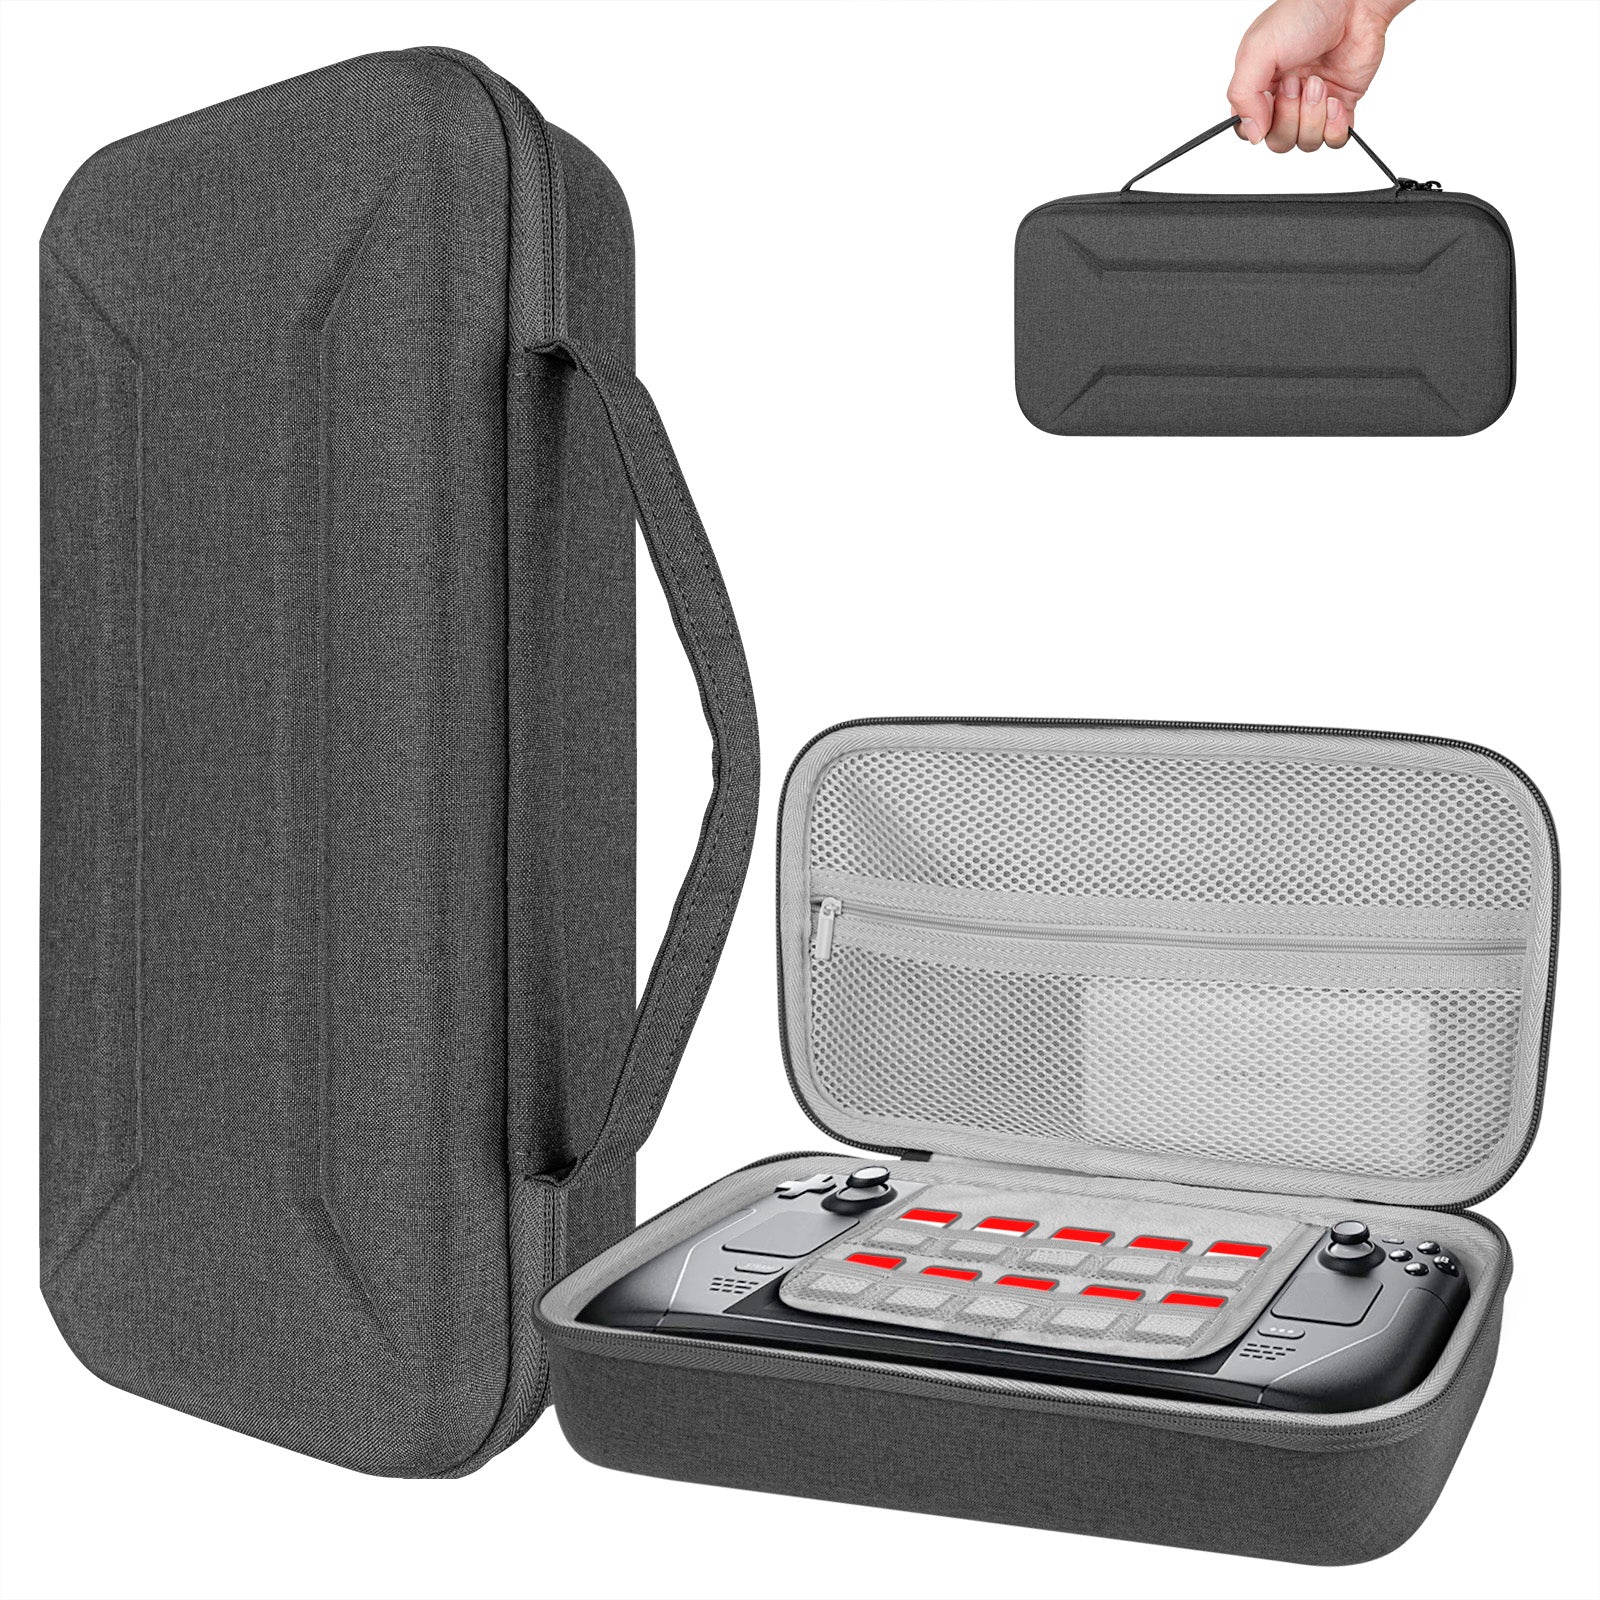 Soft Shell Storage Case For Valve Steam Deck Game Console Portable Travel Case  Cover For Steam Deck Accessories